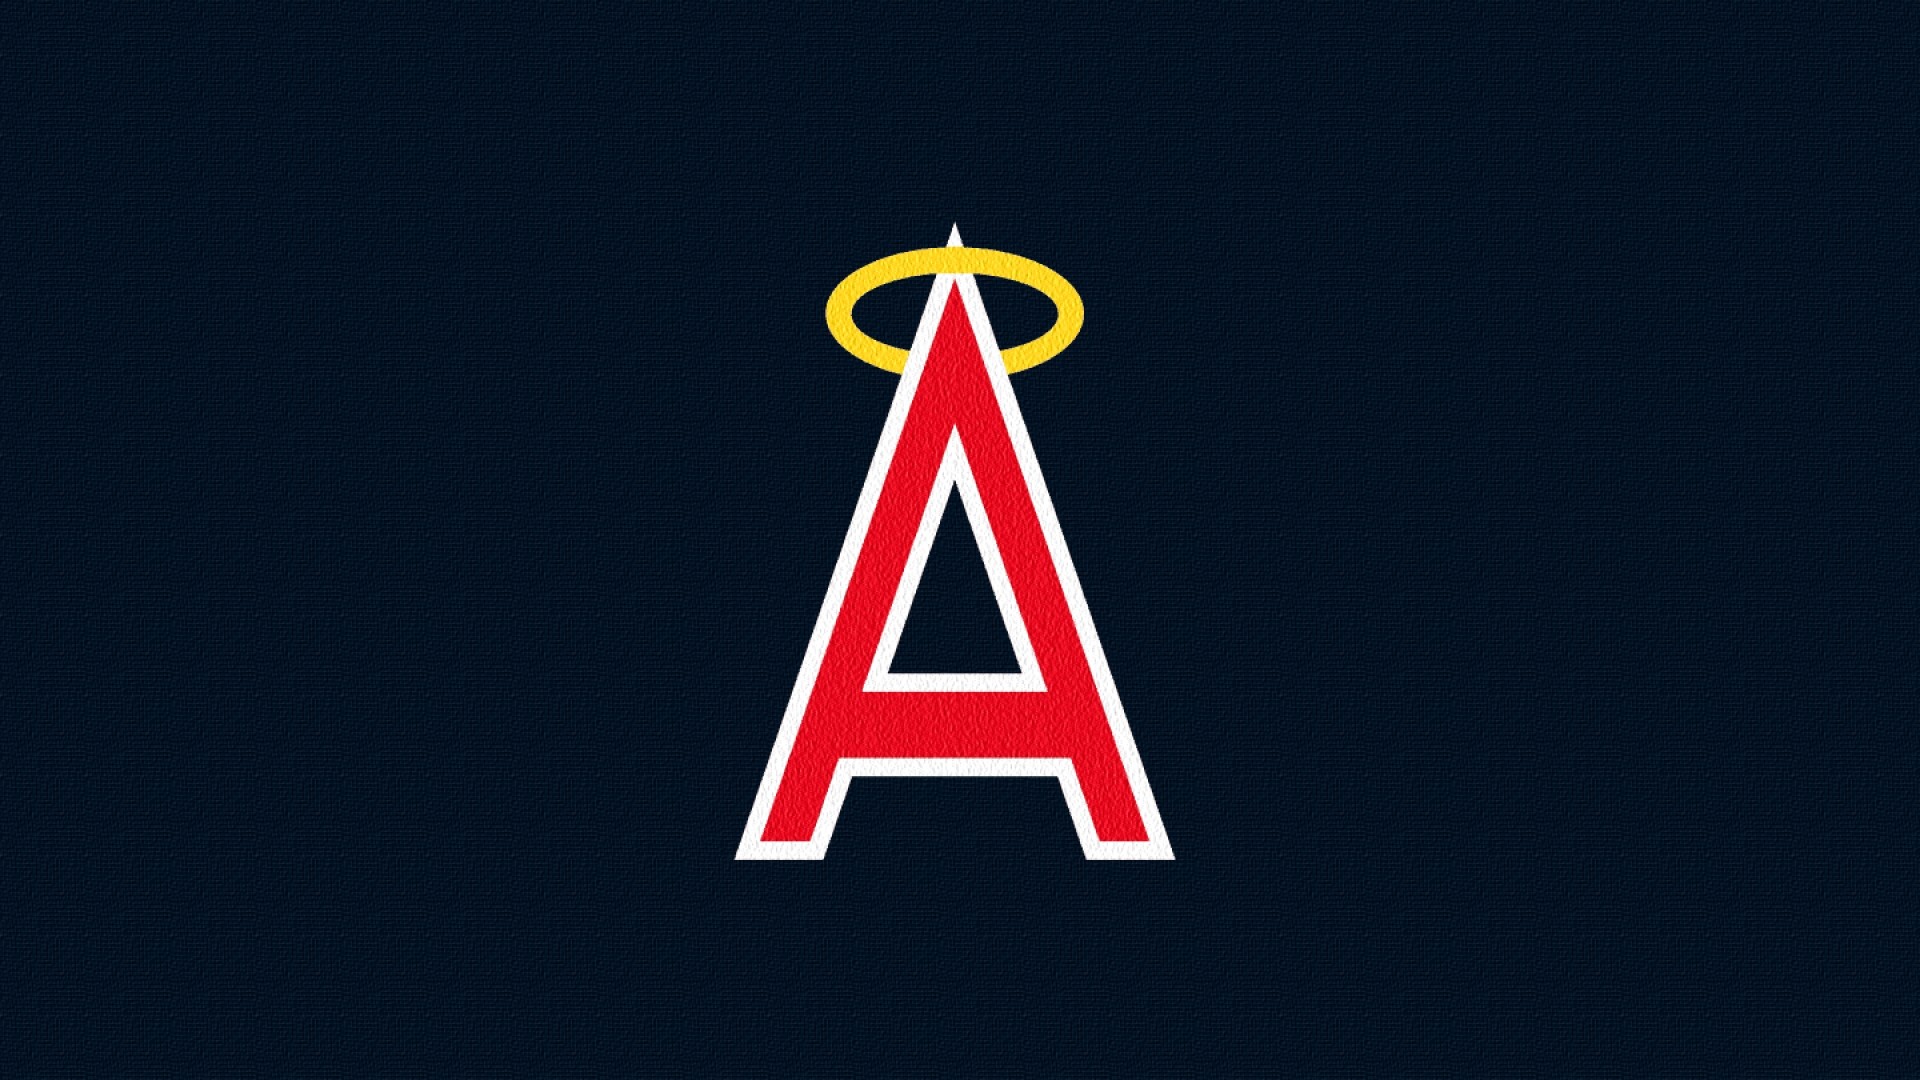 1920x1080 Title : los angeles angels wallpapers group | hd wallpapers | pinterest.  Dimension : 1920 x 1080. File Type : JPG/JPEG